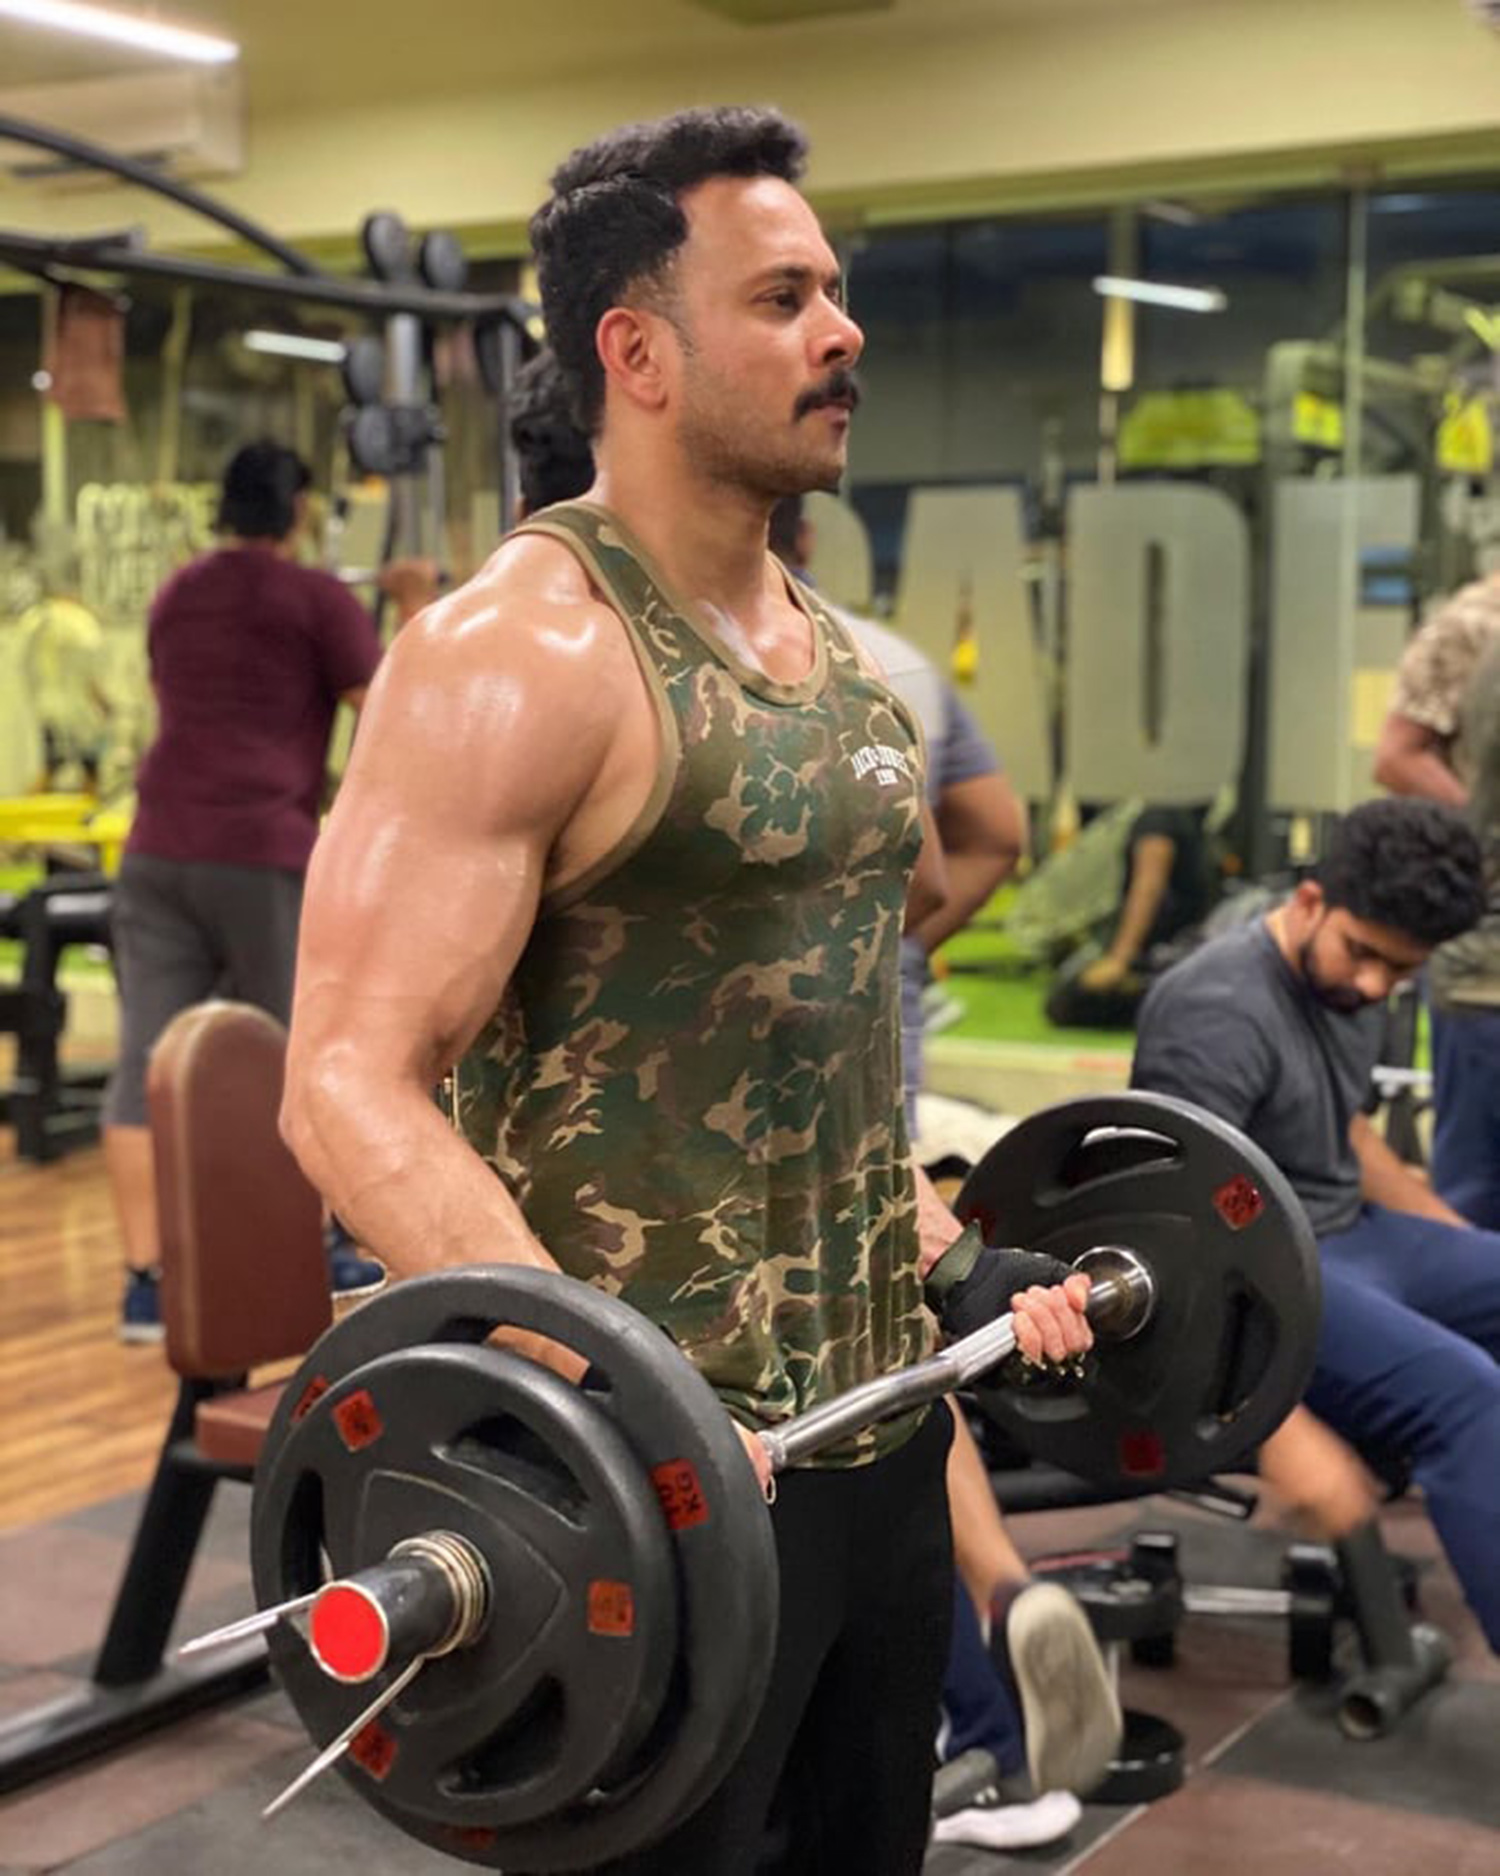 south indian actor bharath gym workout pics,tamil actor bharath gym pics,actor bharath new gym pics,actor bharath latest news,tamil film actor,tamil film news,kollywood actor